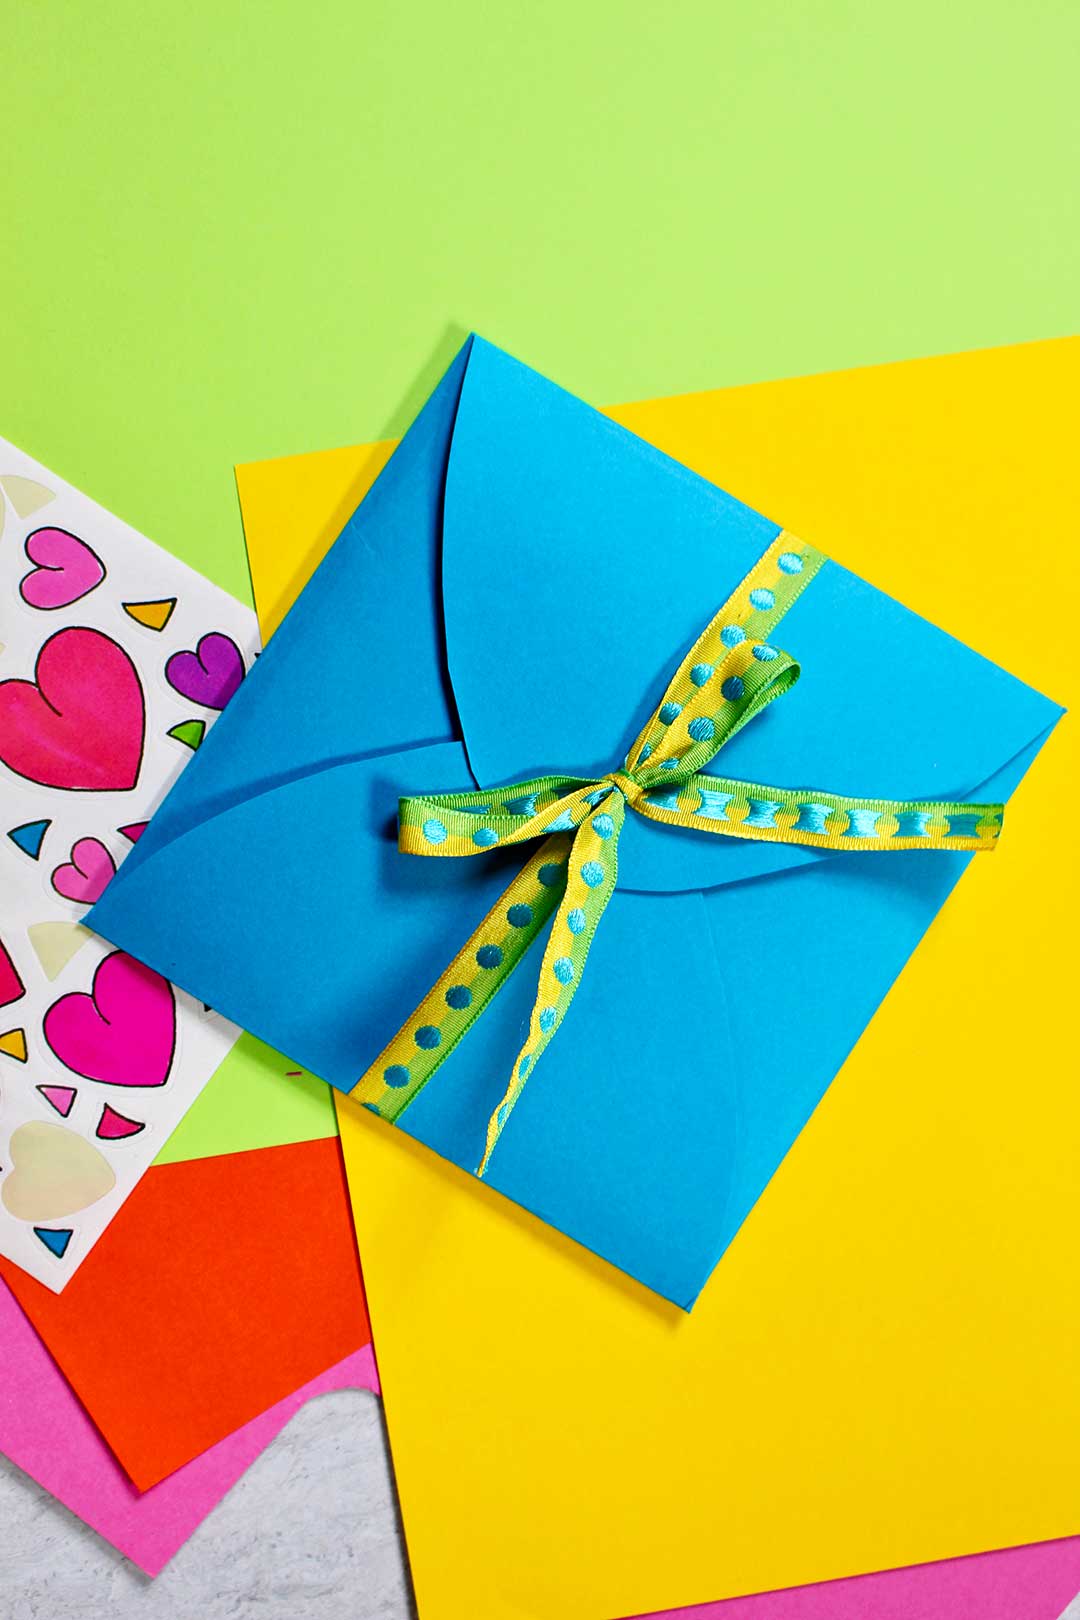 A blue homemade envelope tied with green and yellow ribbon on top a pile of colorful paper and heart stickers.